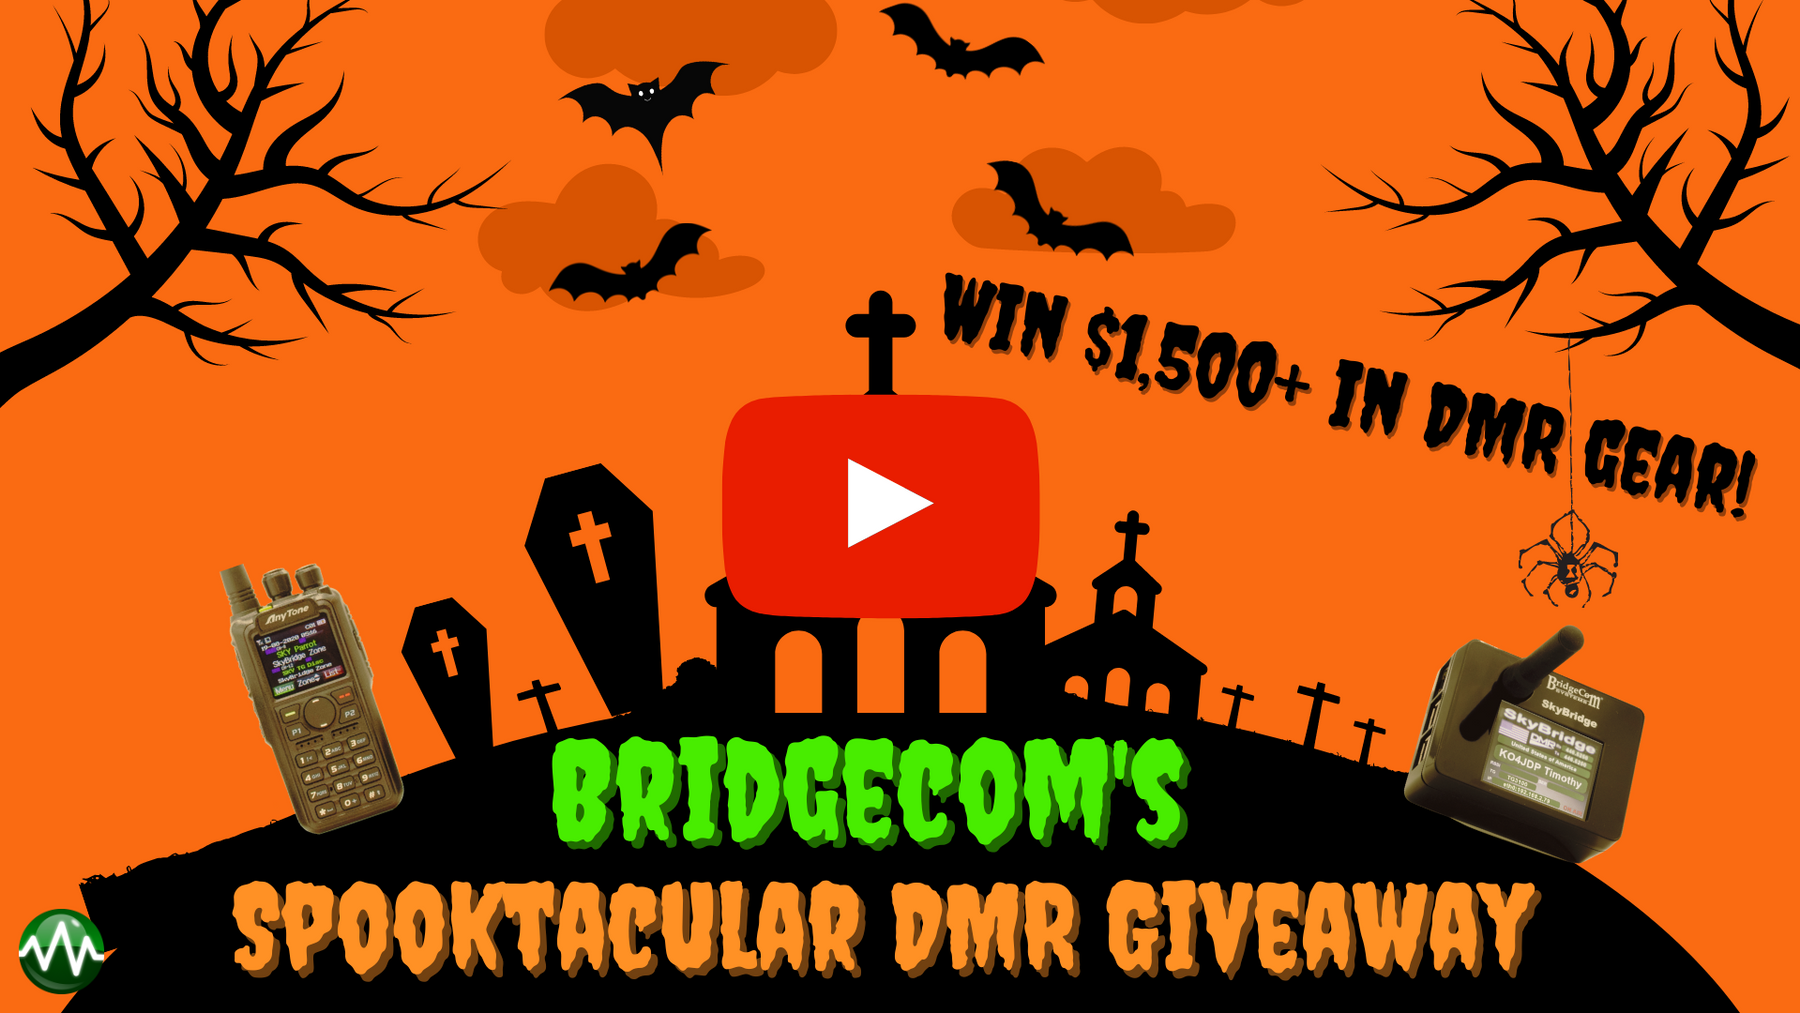 Enter to Win: The Spooktacular DMR Giveaway ($1,500+ in Prizes!)